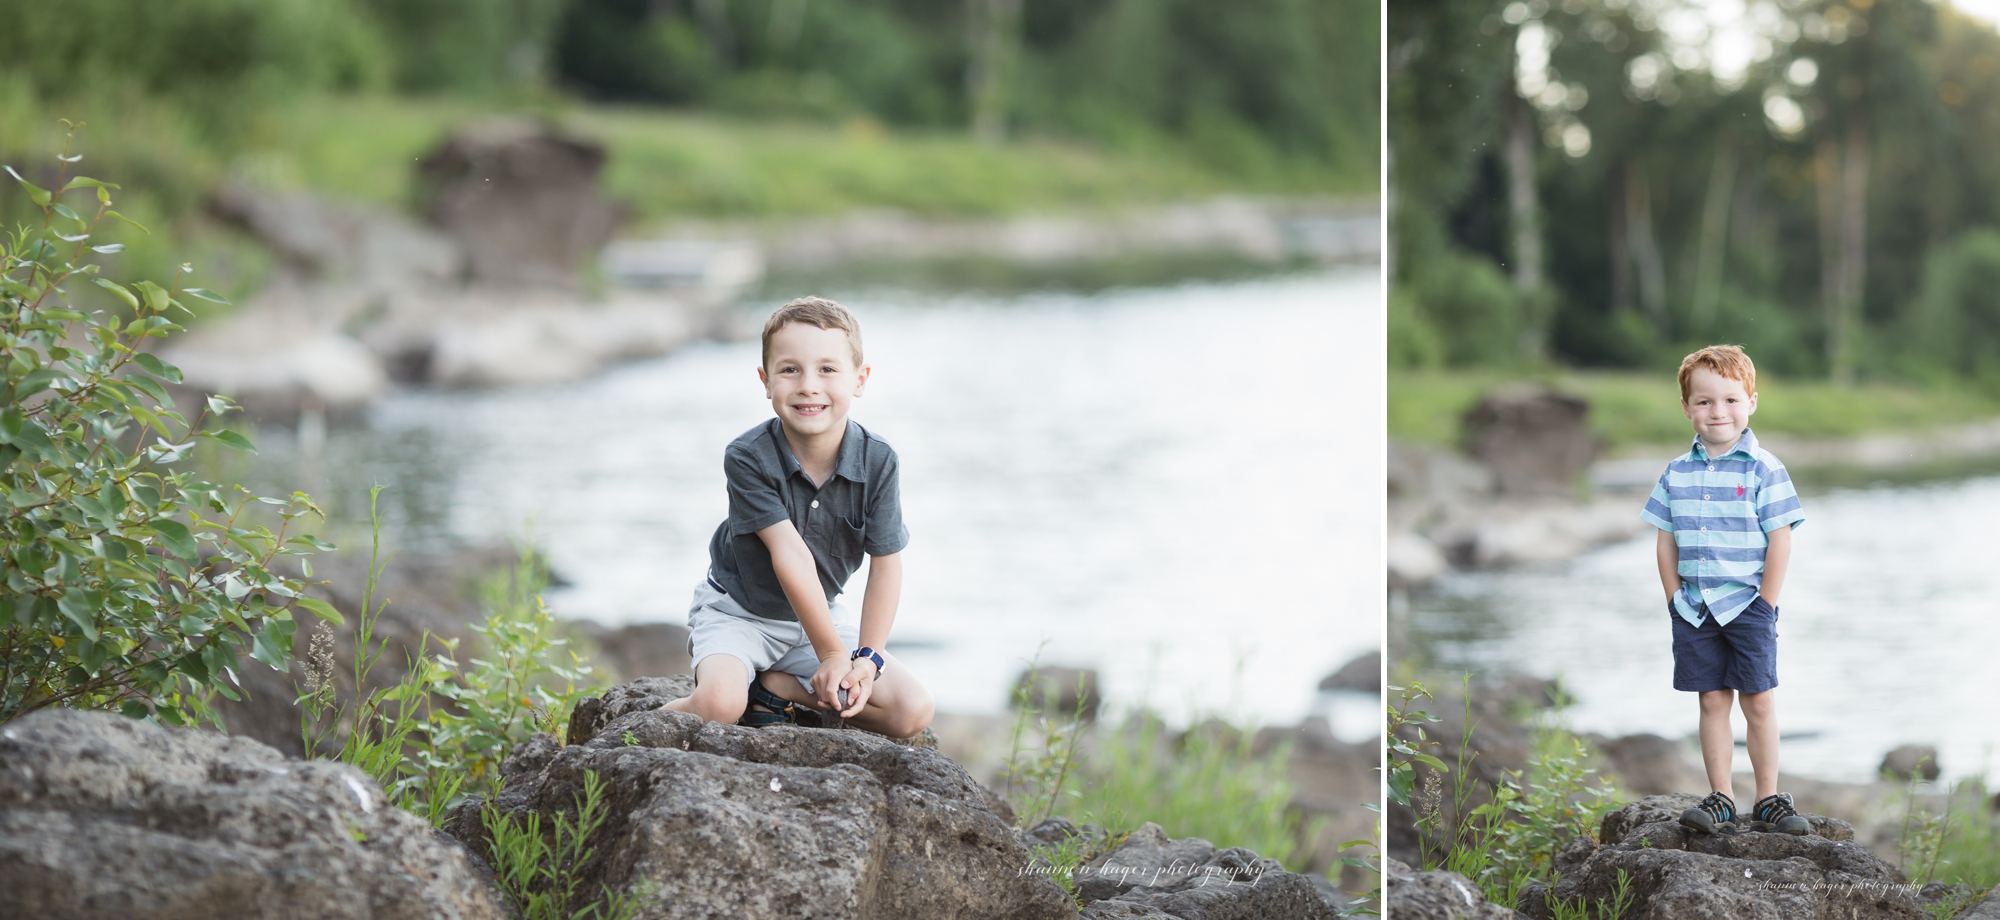 george rogers park family session, lake oswego family photographer, portland family photography, shannon hager photography